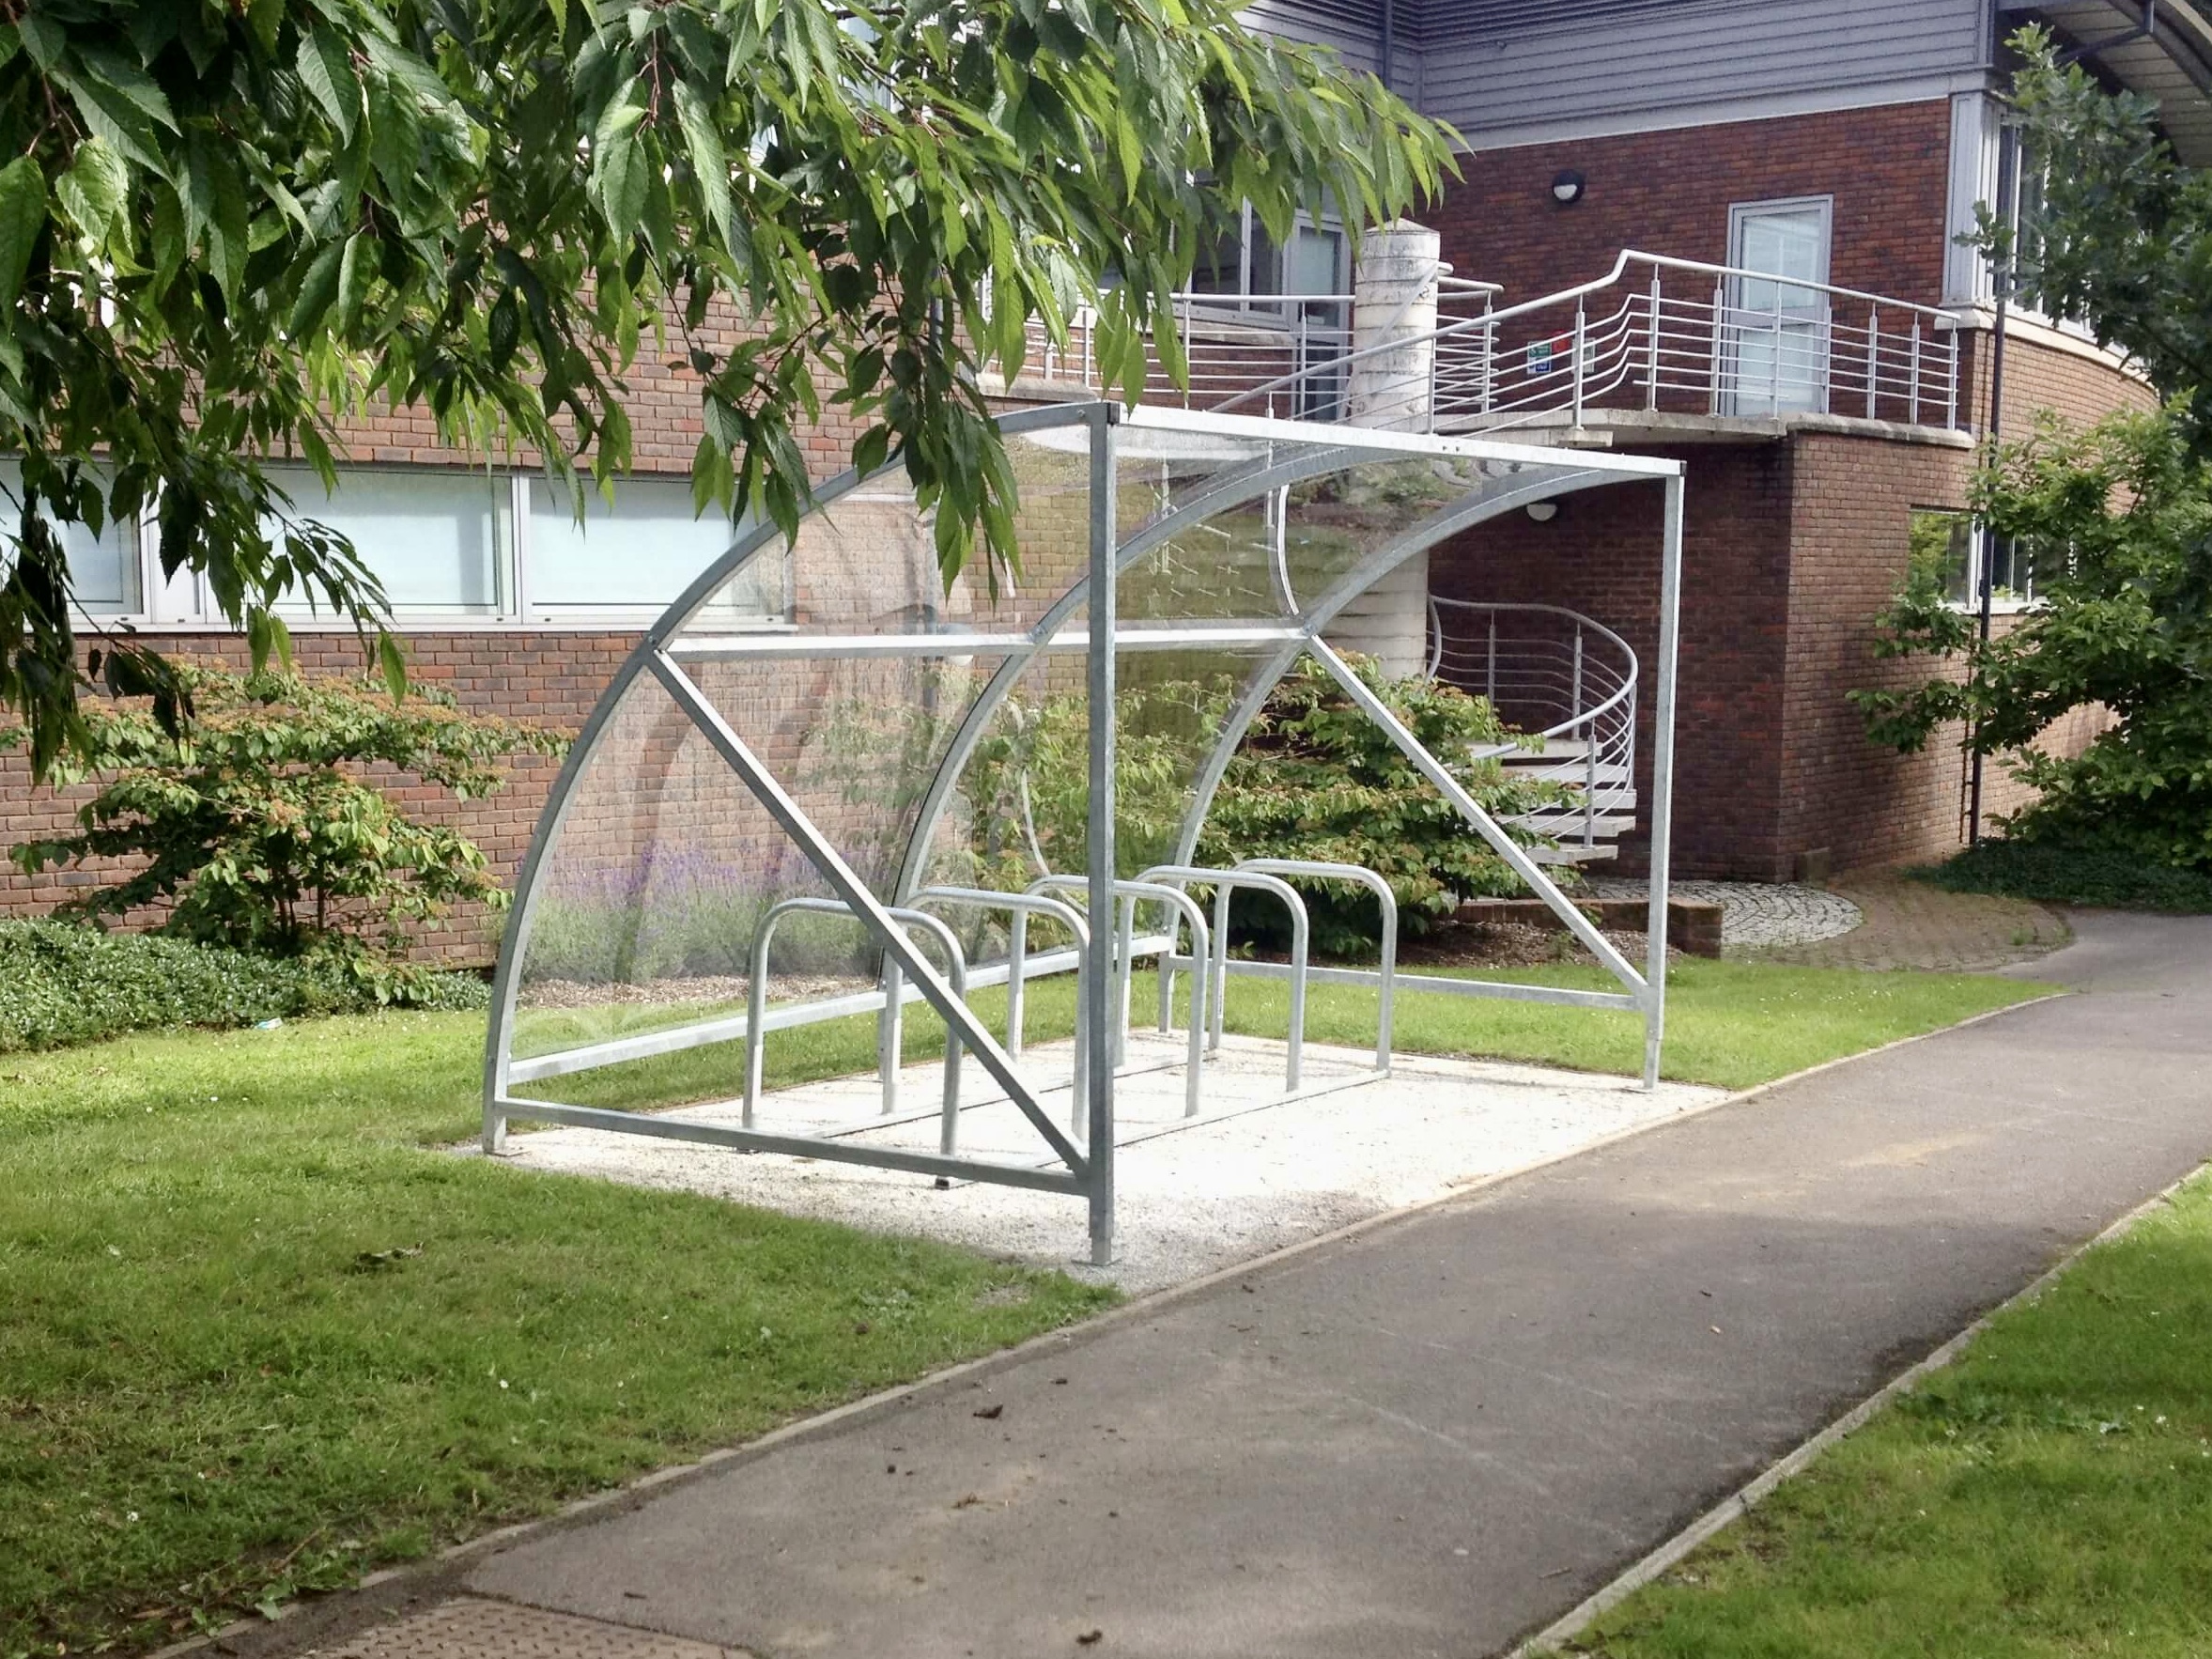 10 space original cycle shelter with galvanised Sheffield stands